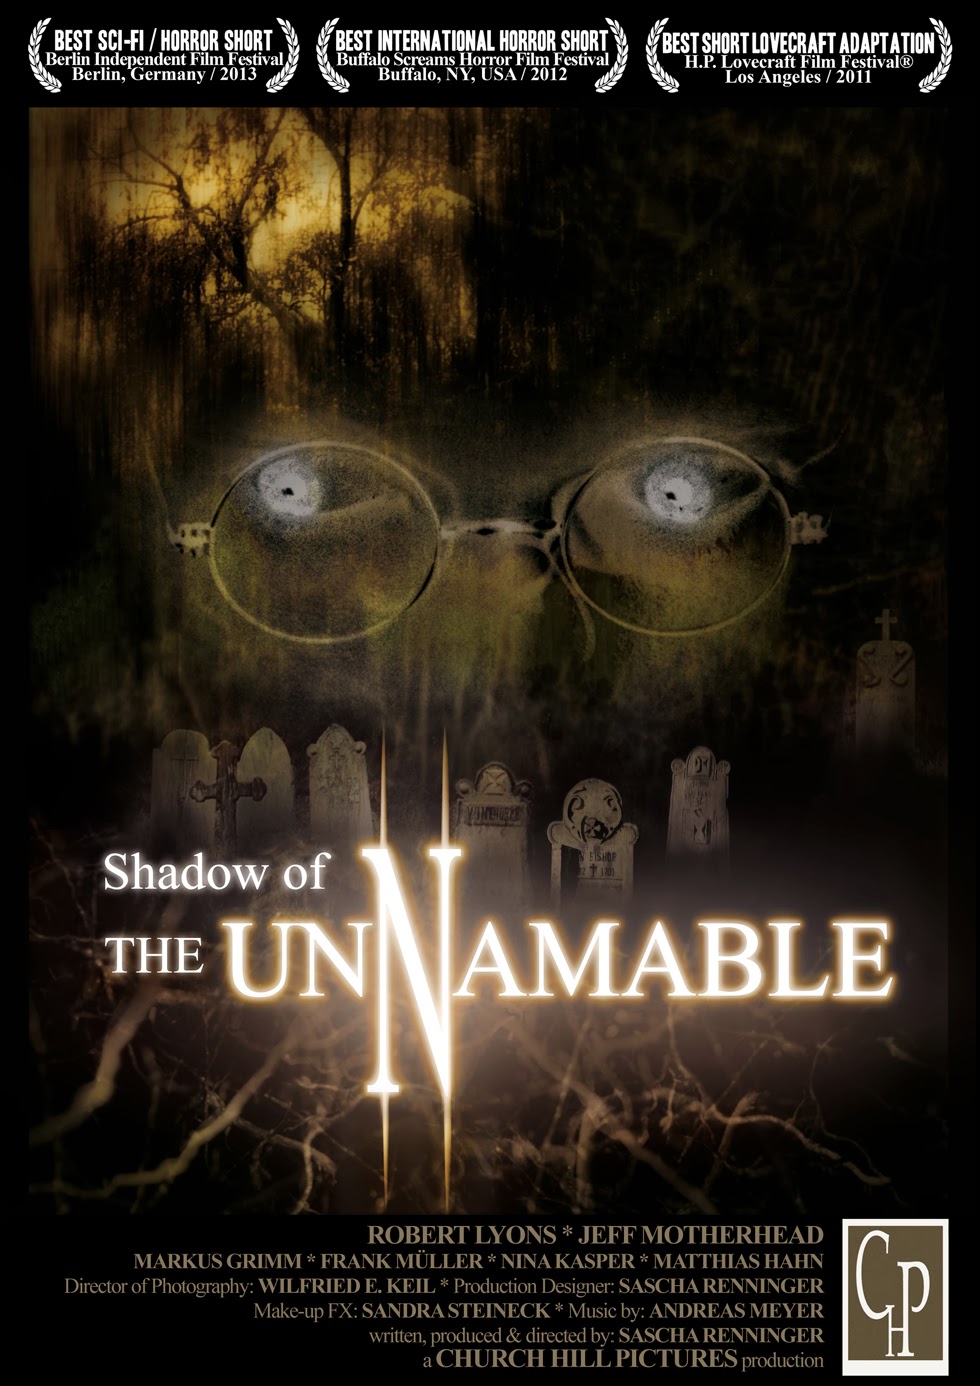 Shadow of the Unnamable